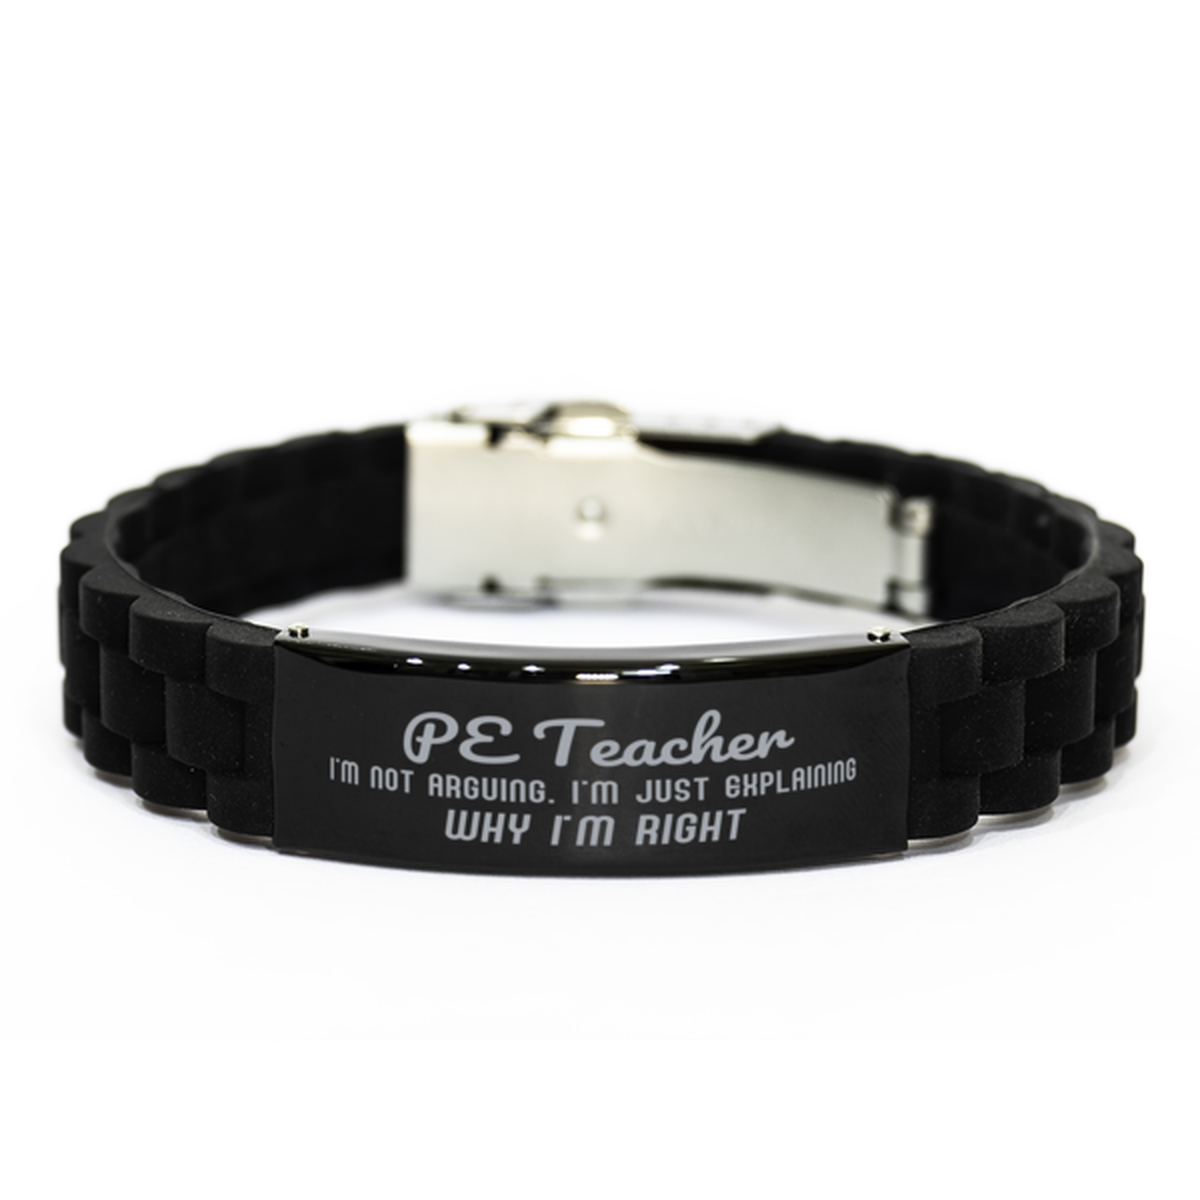 PE Teacher I'm not Arguing. I'm Just Explaining Why I'm RIGHT Black Glidelock Clasp Bracelet, Funny Saying Quote PE Teacher Gifts For PE Teacher Graduation Birthday Christmas Gifts for Men Women Coworker